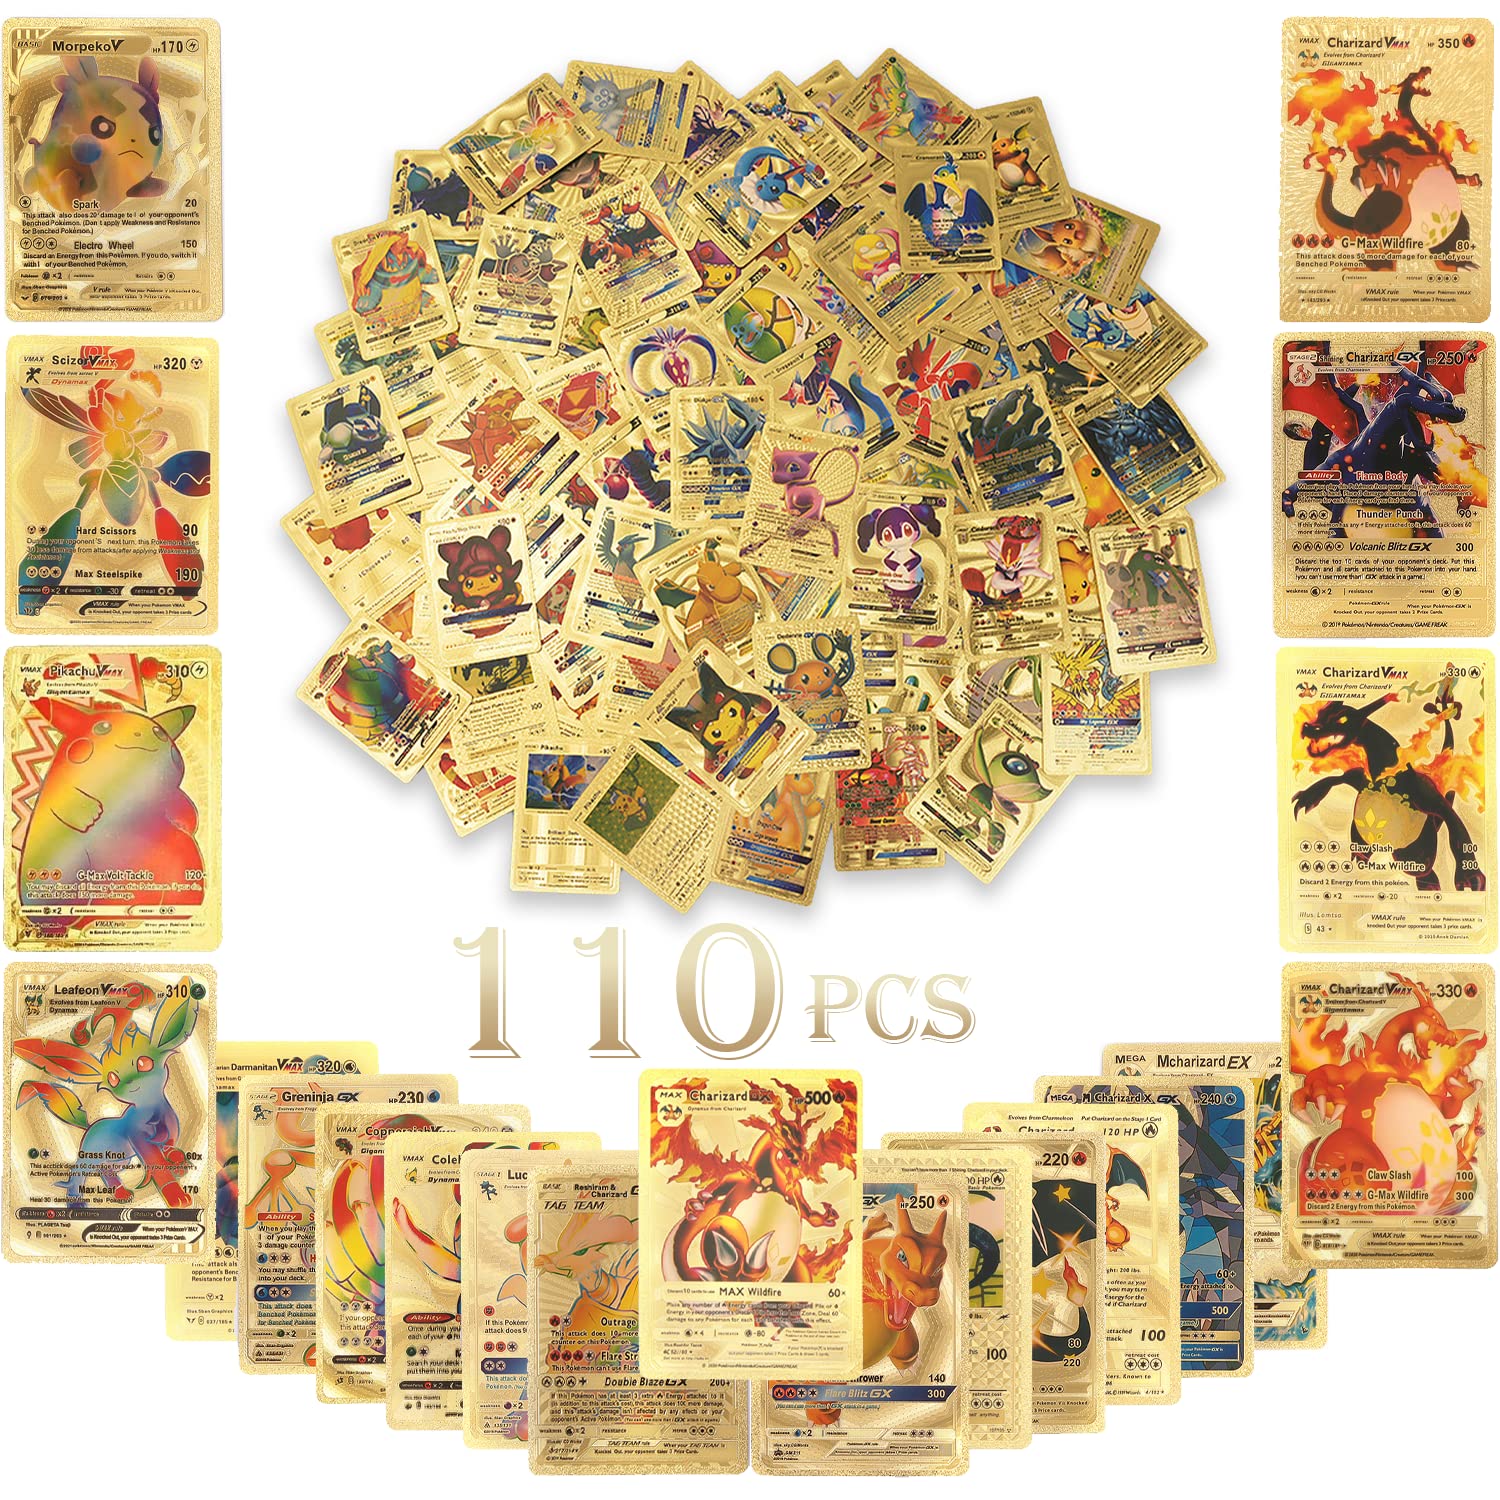 110PCS English Pokemon Gold Card Pack Vmax V GX EX DX Box Charizard Pikachu TAG COSPLAY Rare Collection Battle Cards Children Toys Gift Anime Party Birthday Gifts